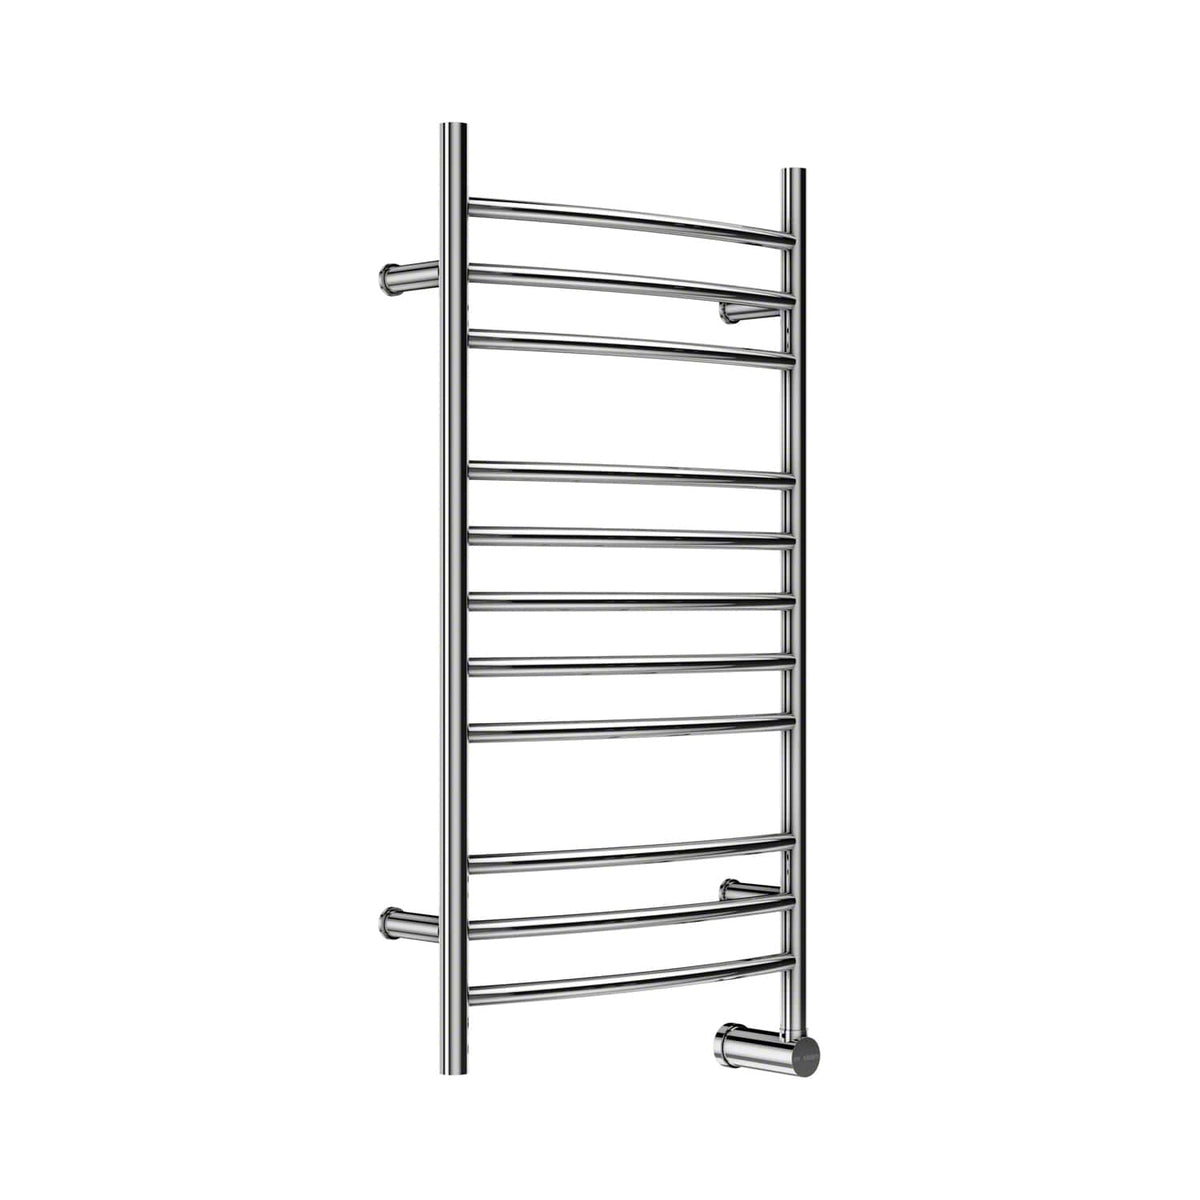 Mr. Steam Metro Collection® 11-Bar Wall-Mounted Electric Towel Warmer with Digital Timer in Stainless Steel Polished